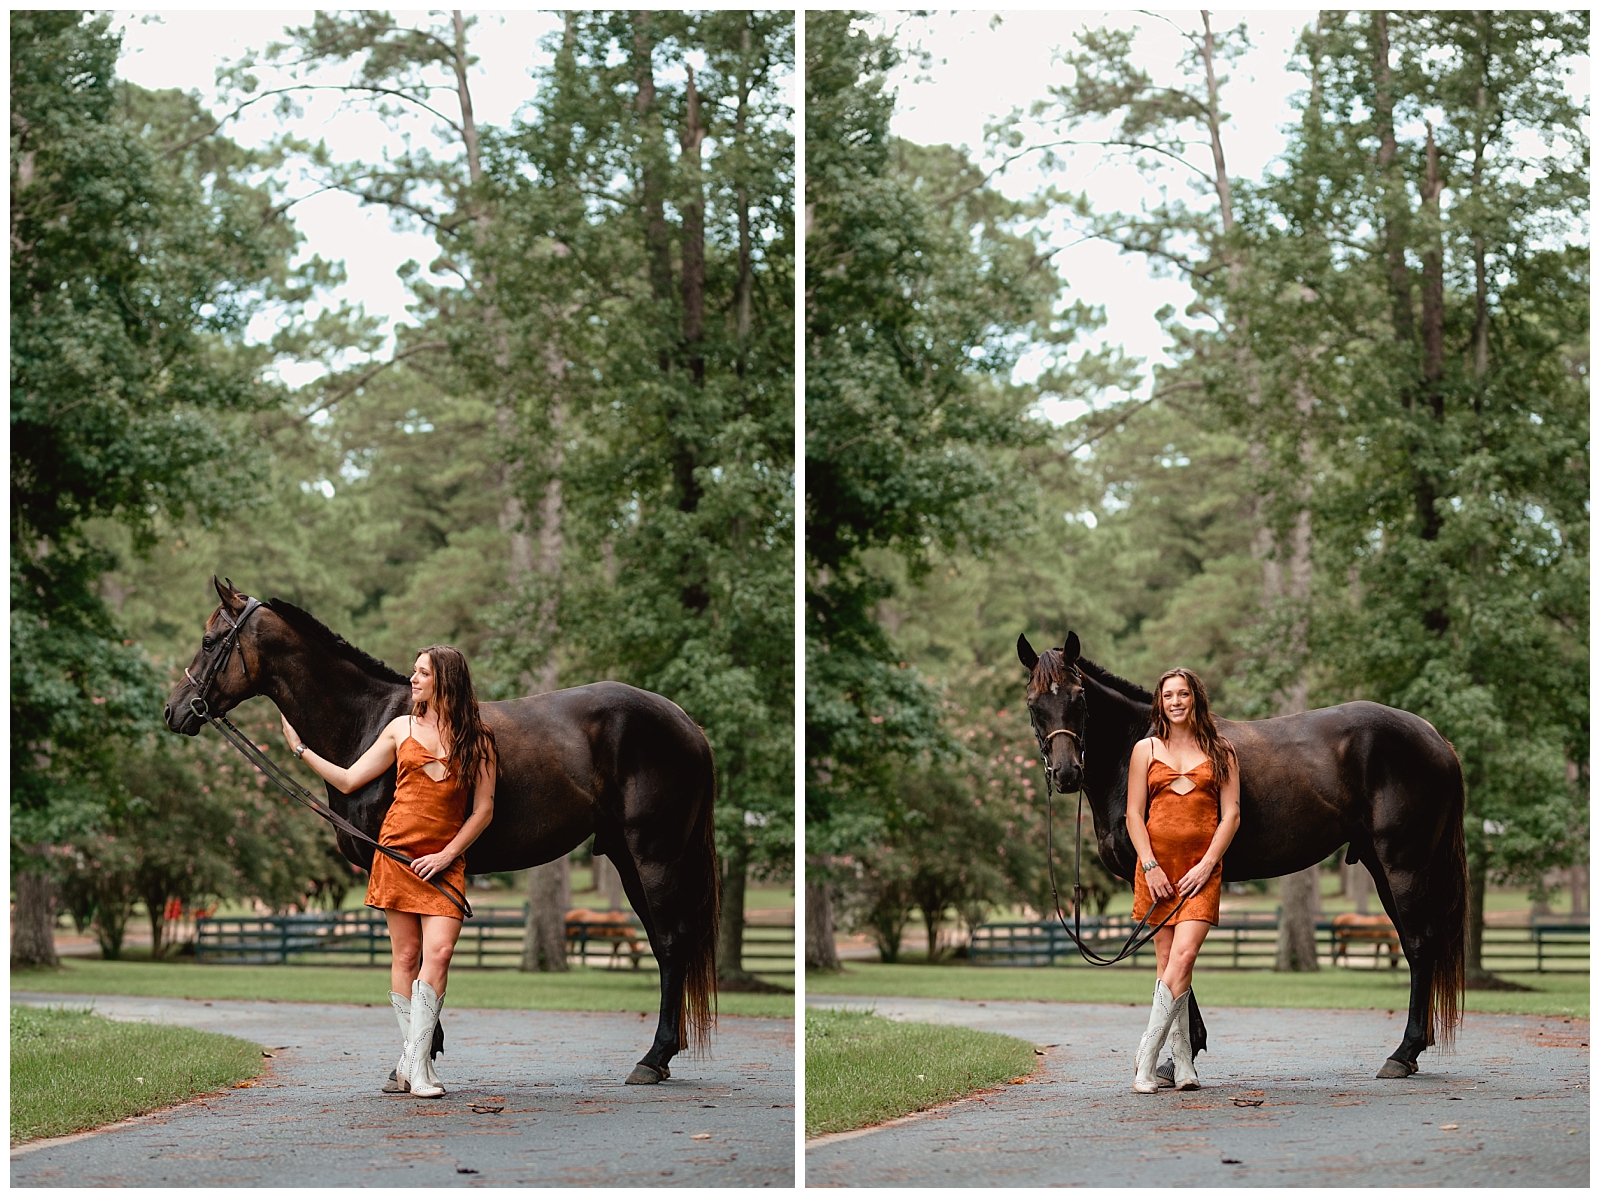 Professional equine photographer in Tallahassee, Florida specializing in horse and rider photoshoots.